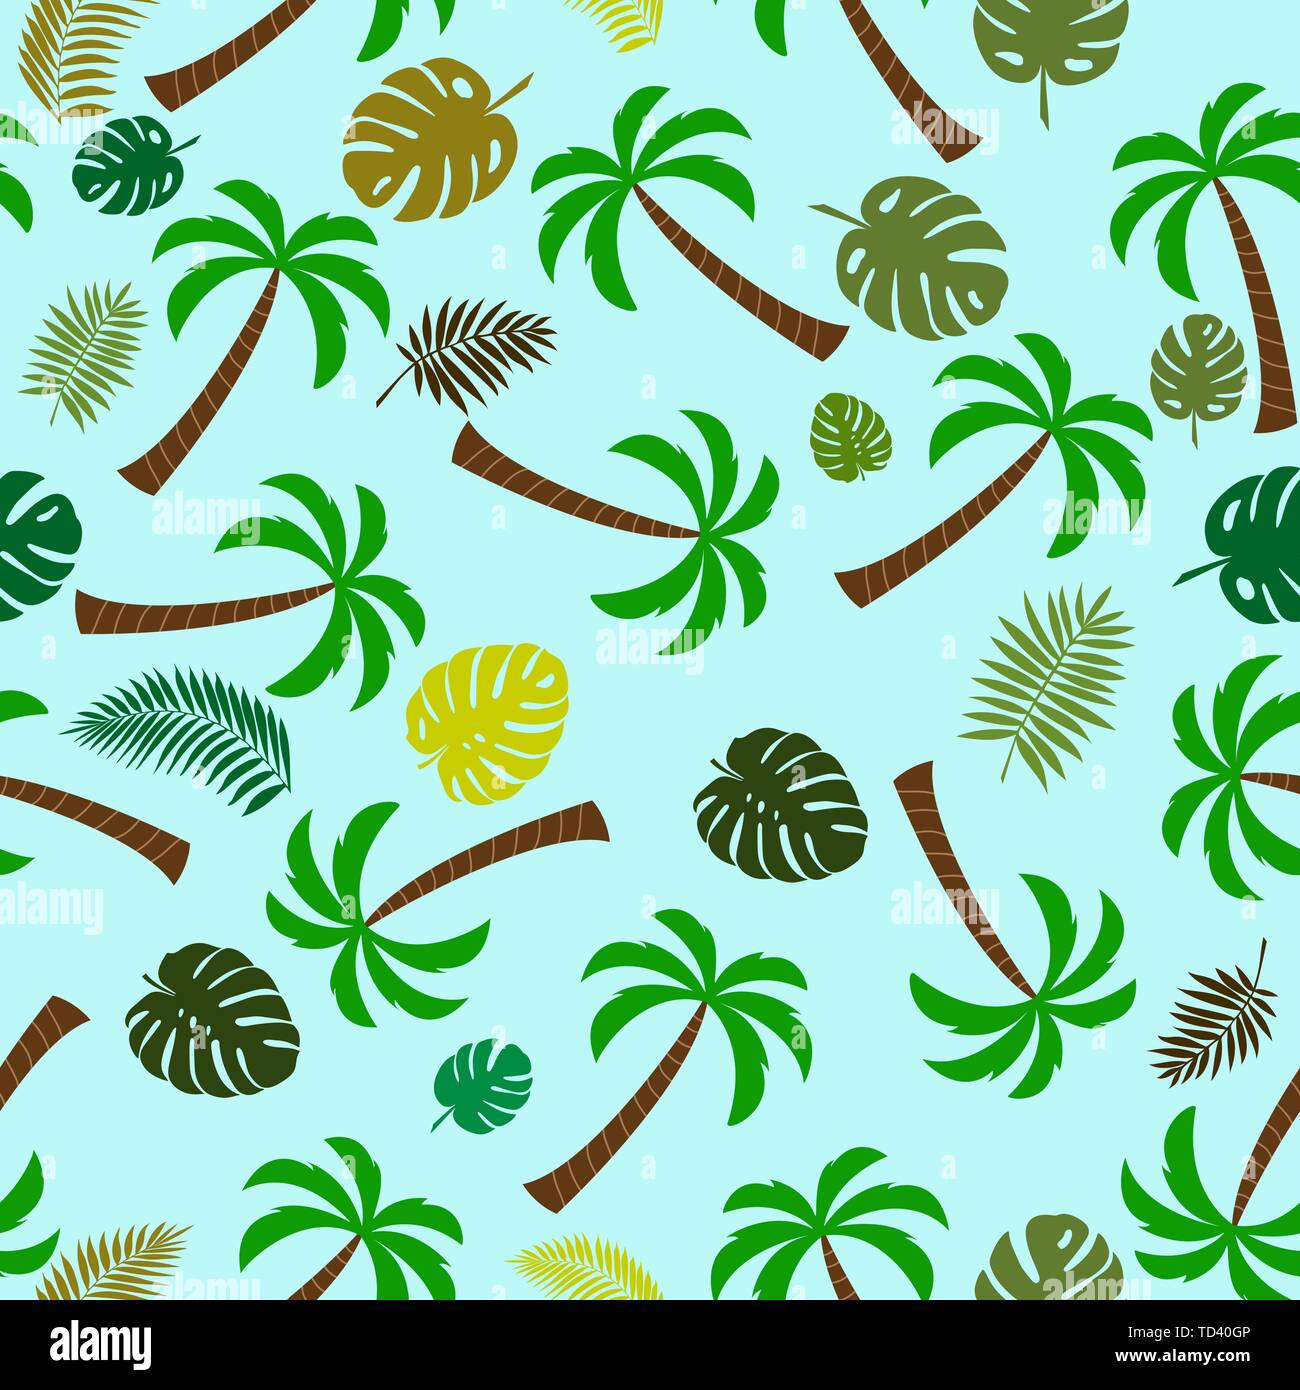 Seamless pattern with palm trees and tropical plant leaves. Ideal for textiles, packaging, paper printing, simple backgrounds and textures. Stock Vector